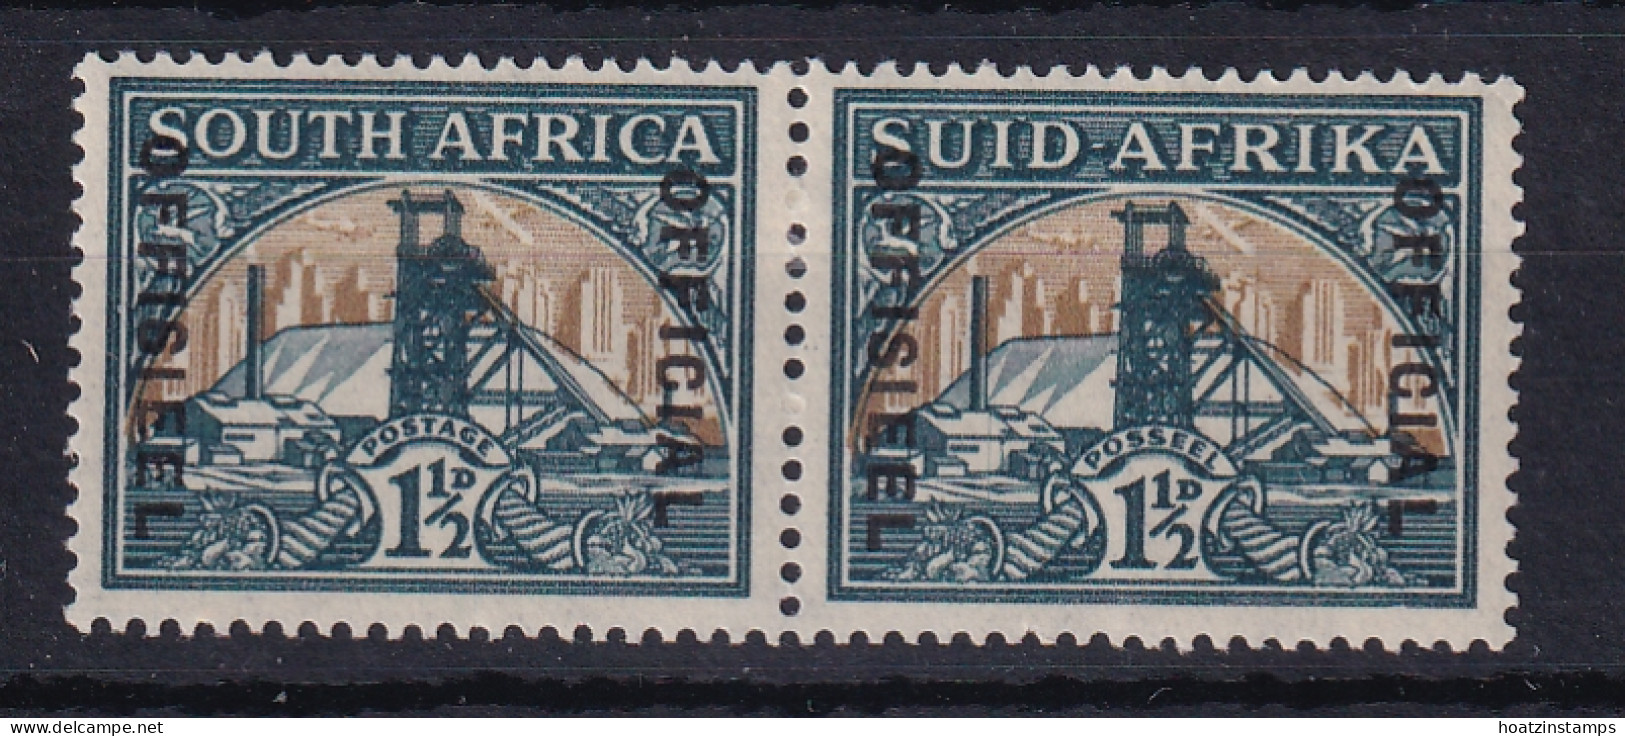 South Africa: 1935/49   Official - Goldmine   SG O22aw    1½d   Green & Bright Gold  [Wmk Upright]  MH Pair - Oficiales